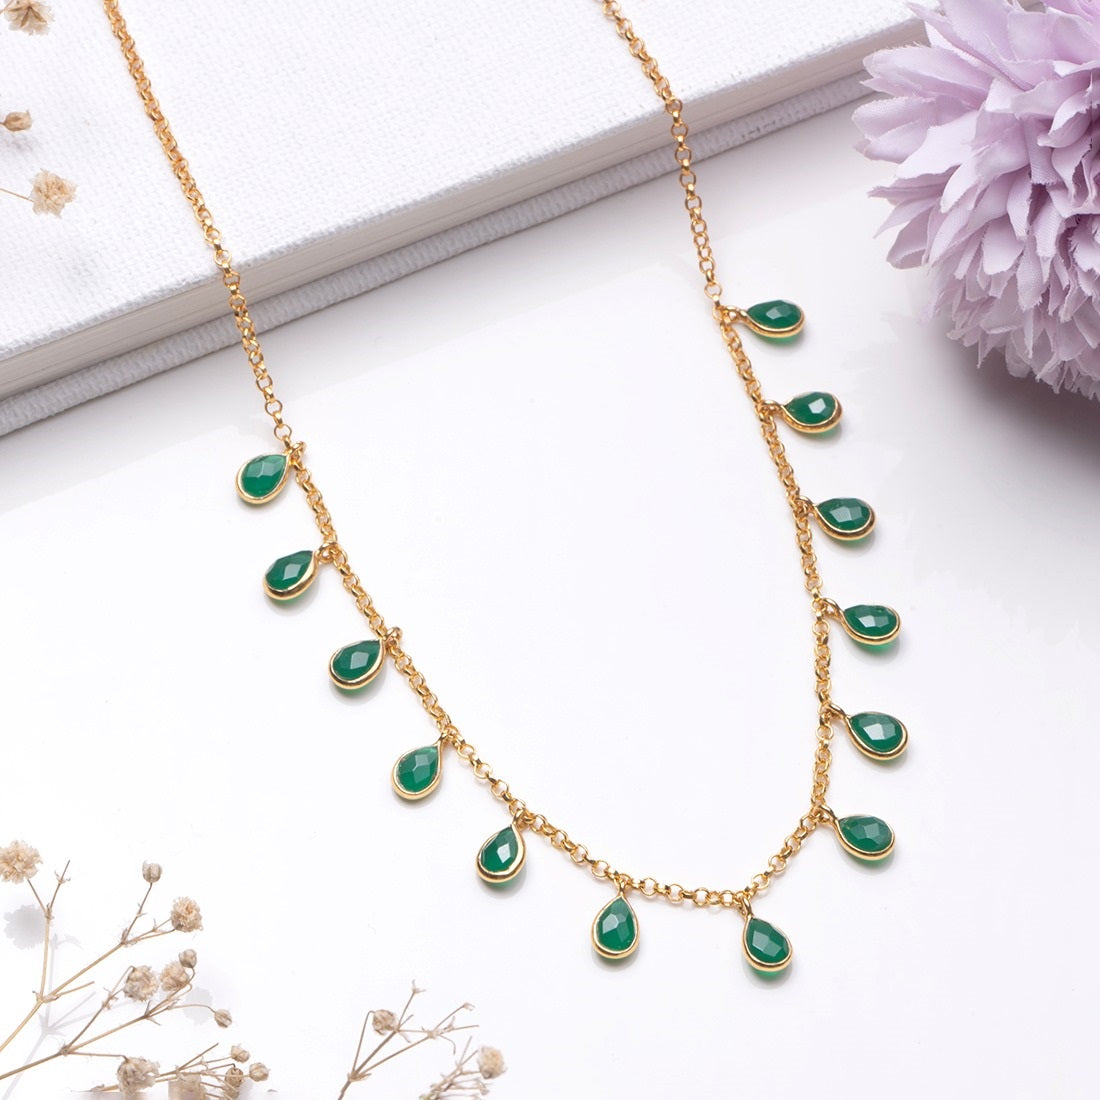 Gilded Harmony Gold-Plated 925 Sterling Silver Necklace Chain